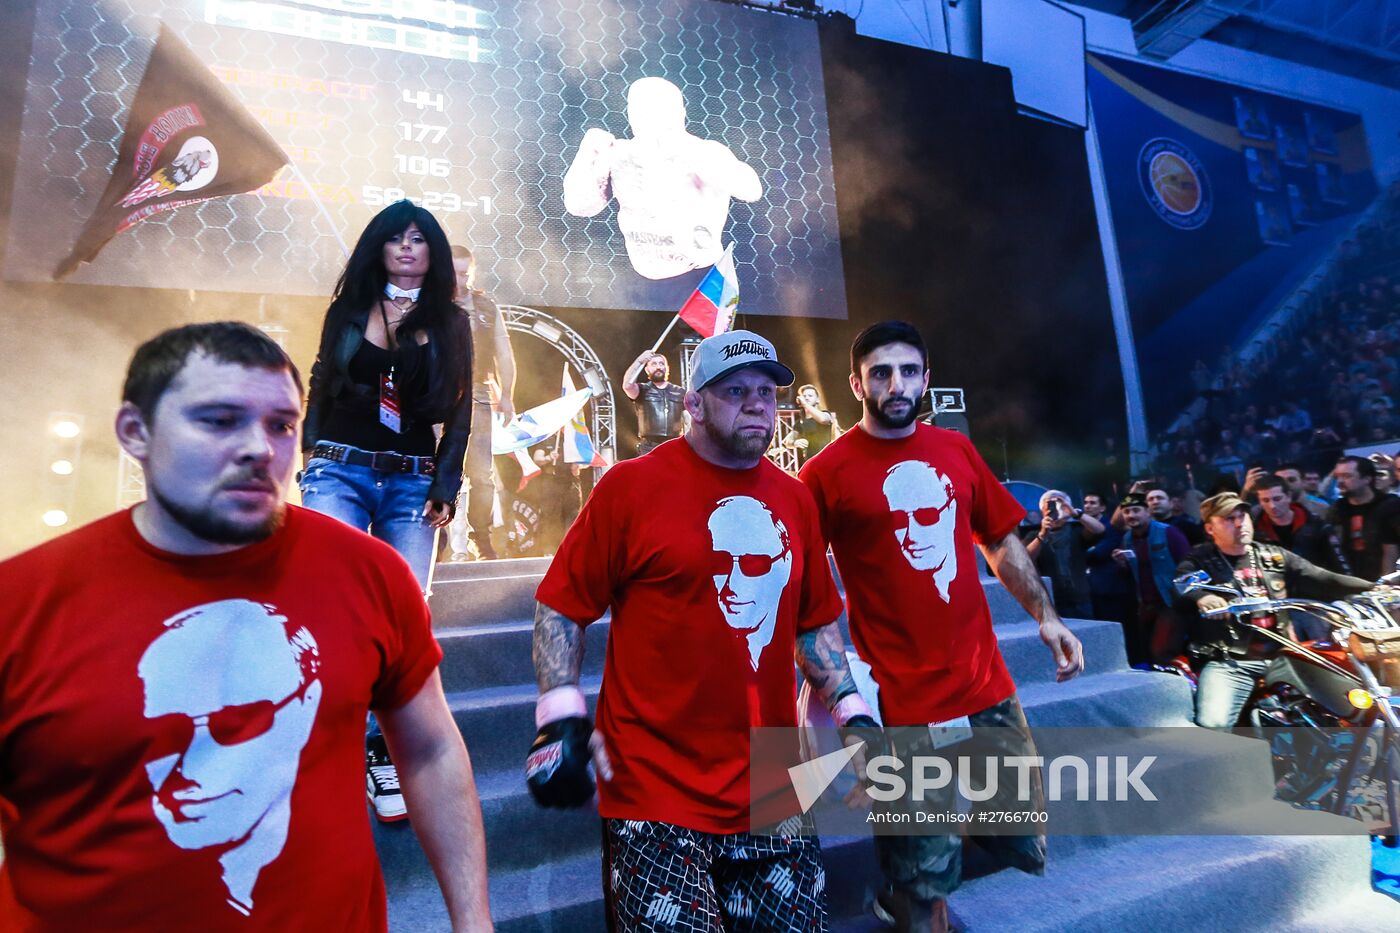 MMA fighter Jeff Monson's first fight under Russian flag